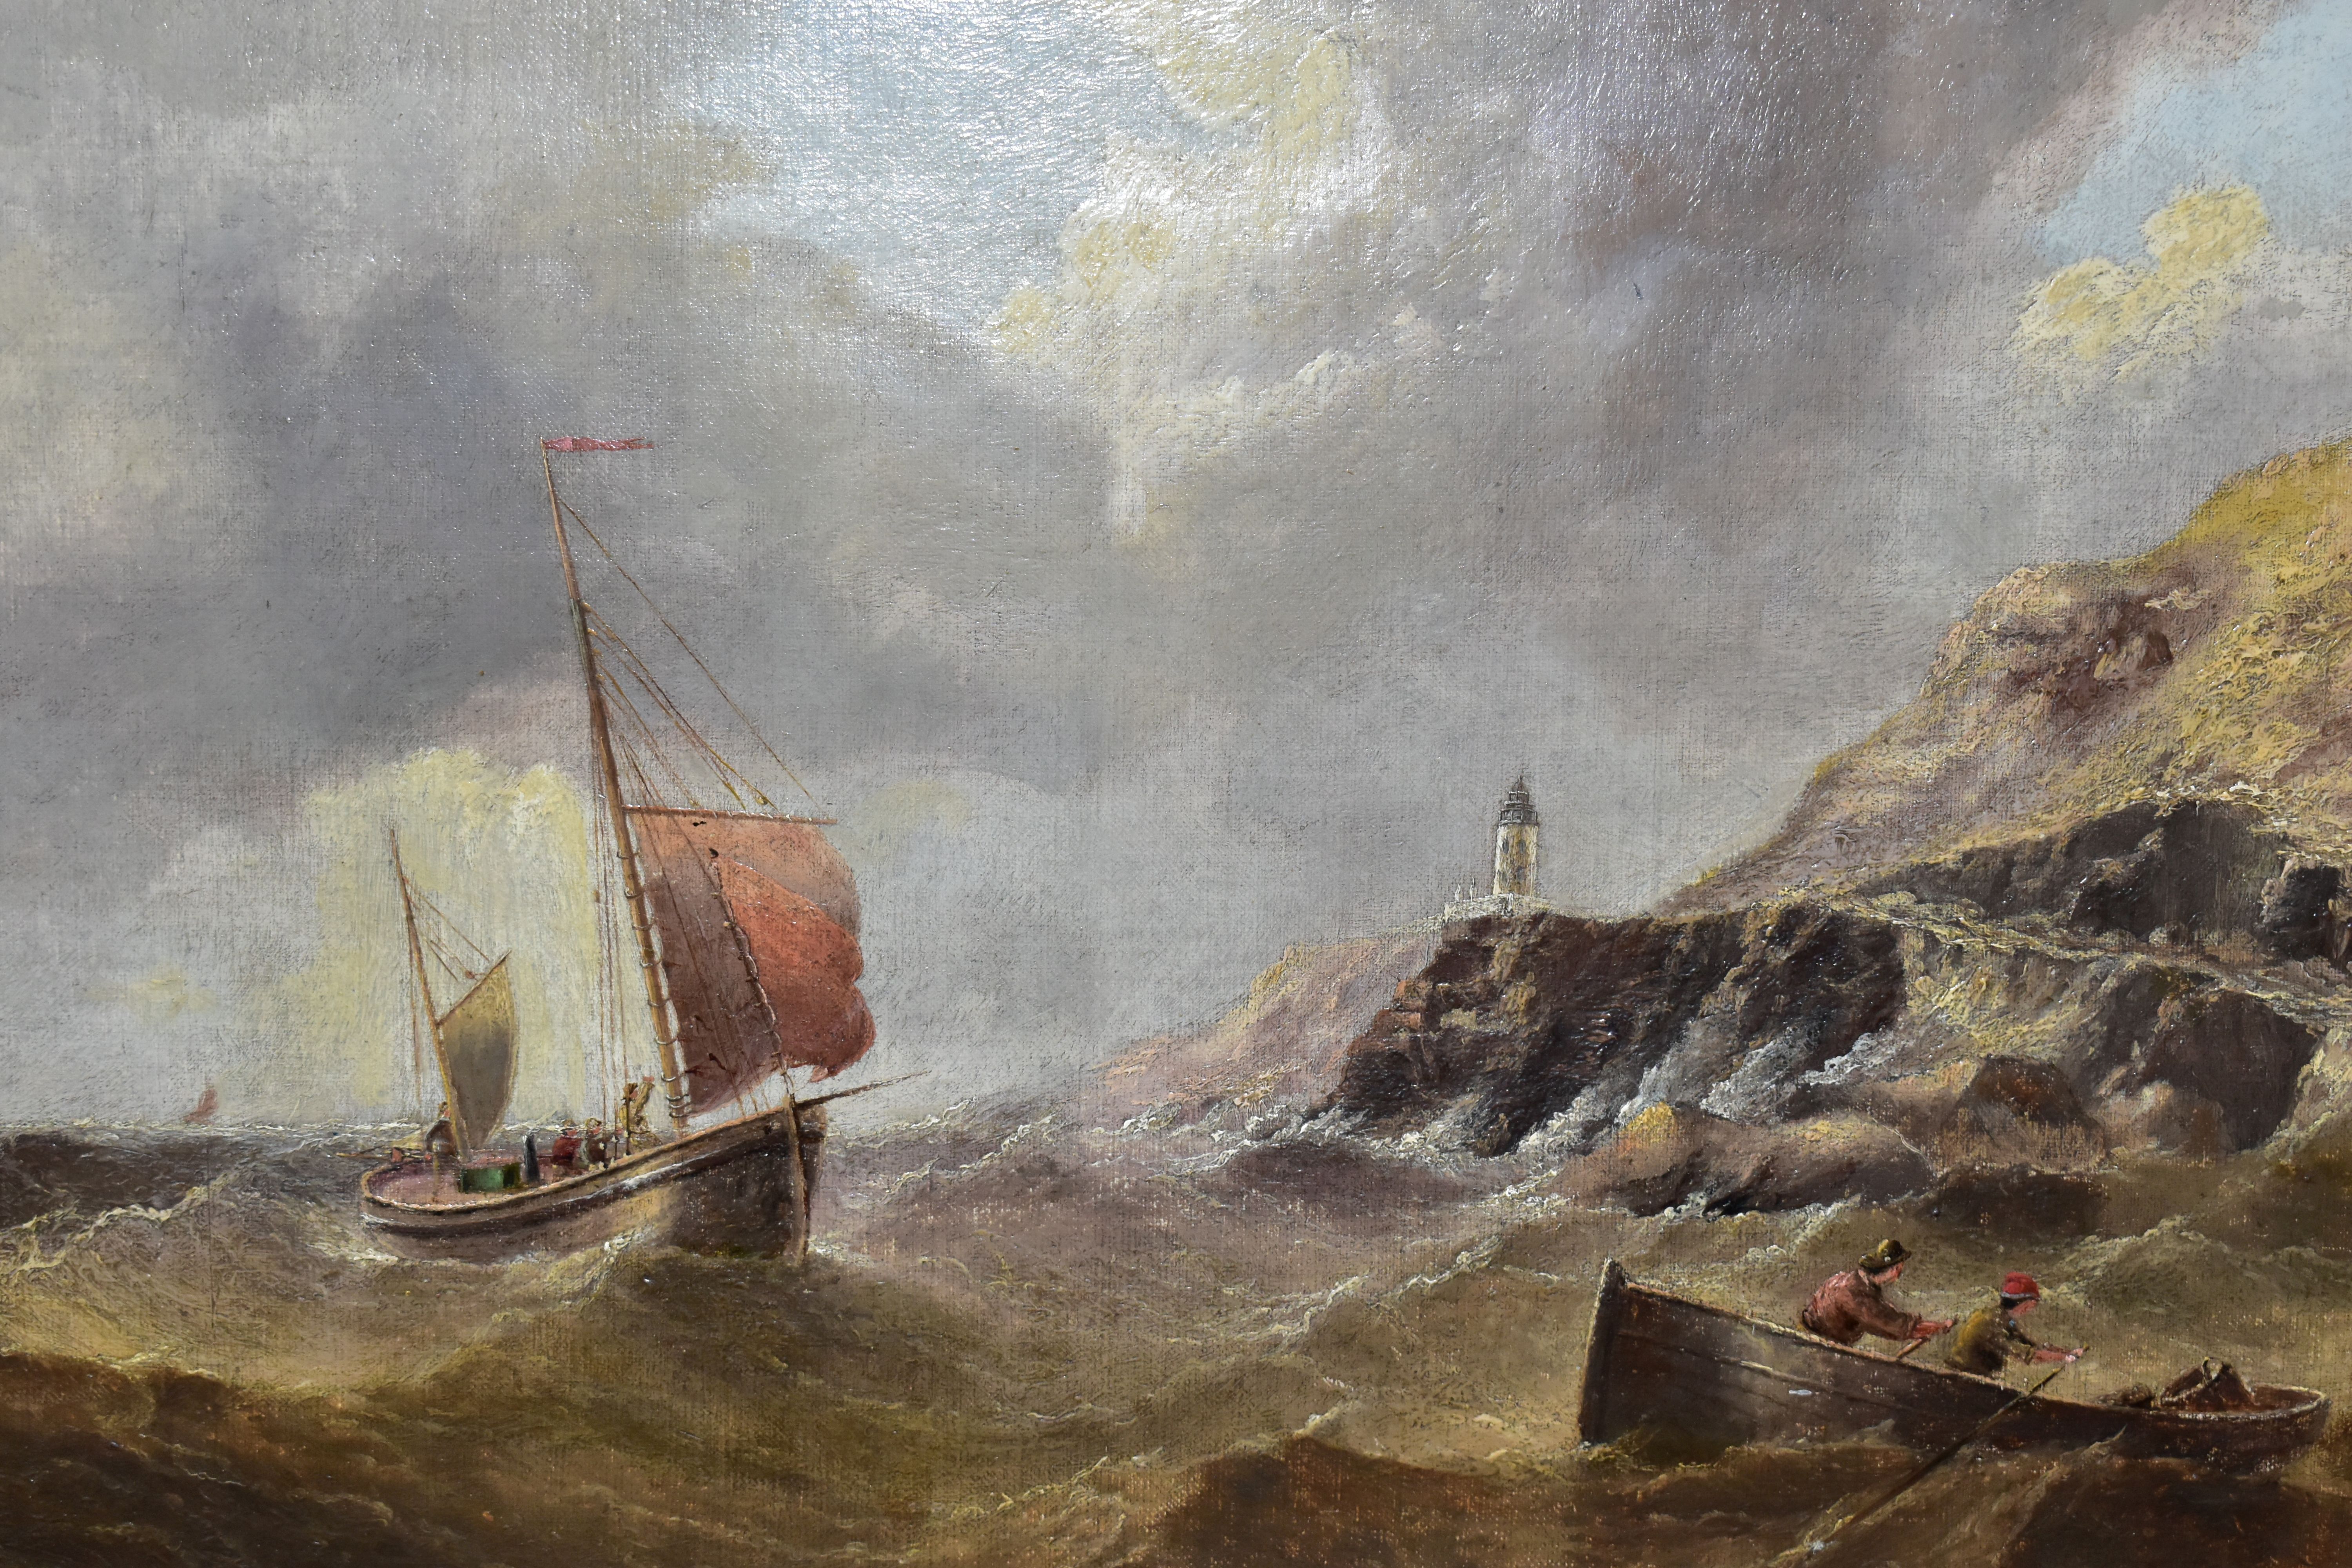 H. MOORE (19TH CENTURY) A FISHING BOAT AND TENDER IN ROUGH SEAS OFF A ROCKY COASTLINE, signed and - Image 2 of 3